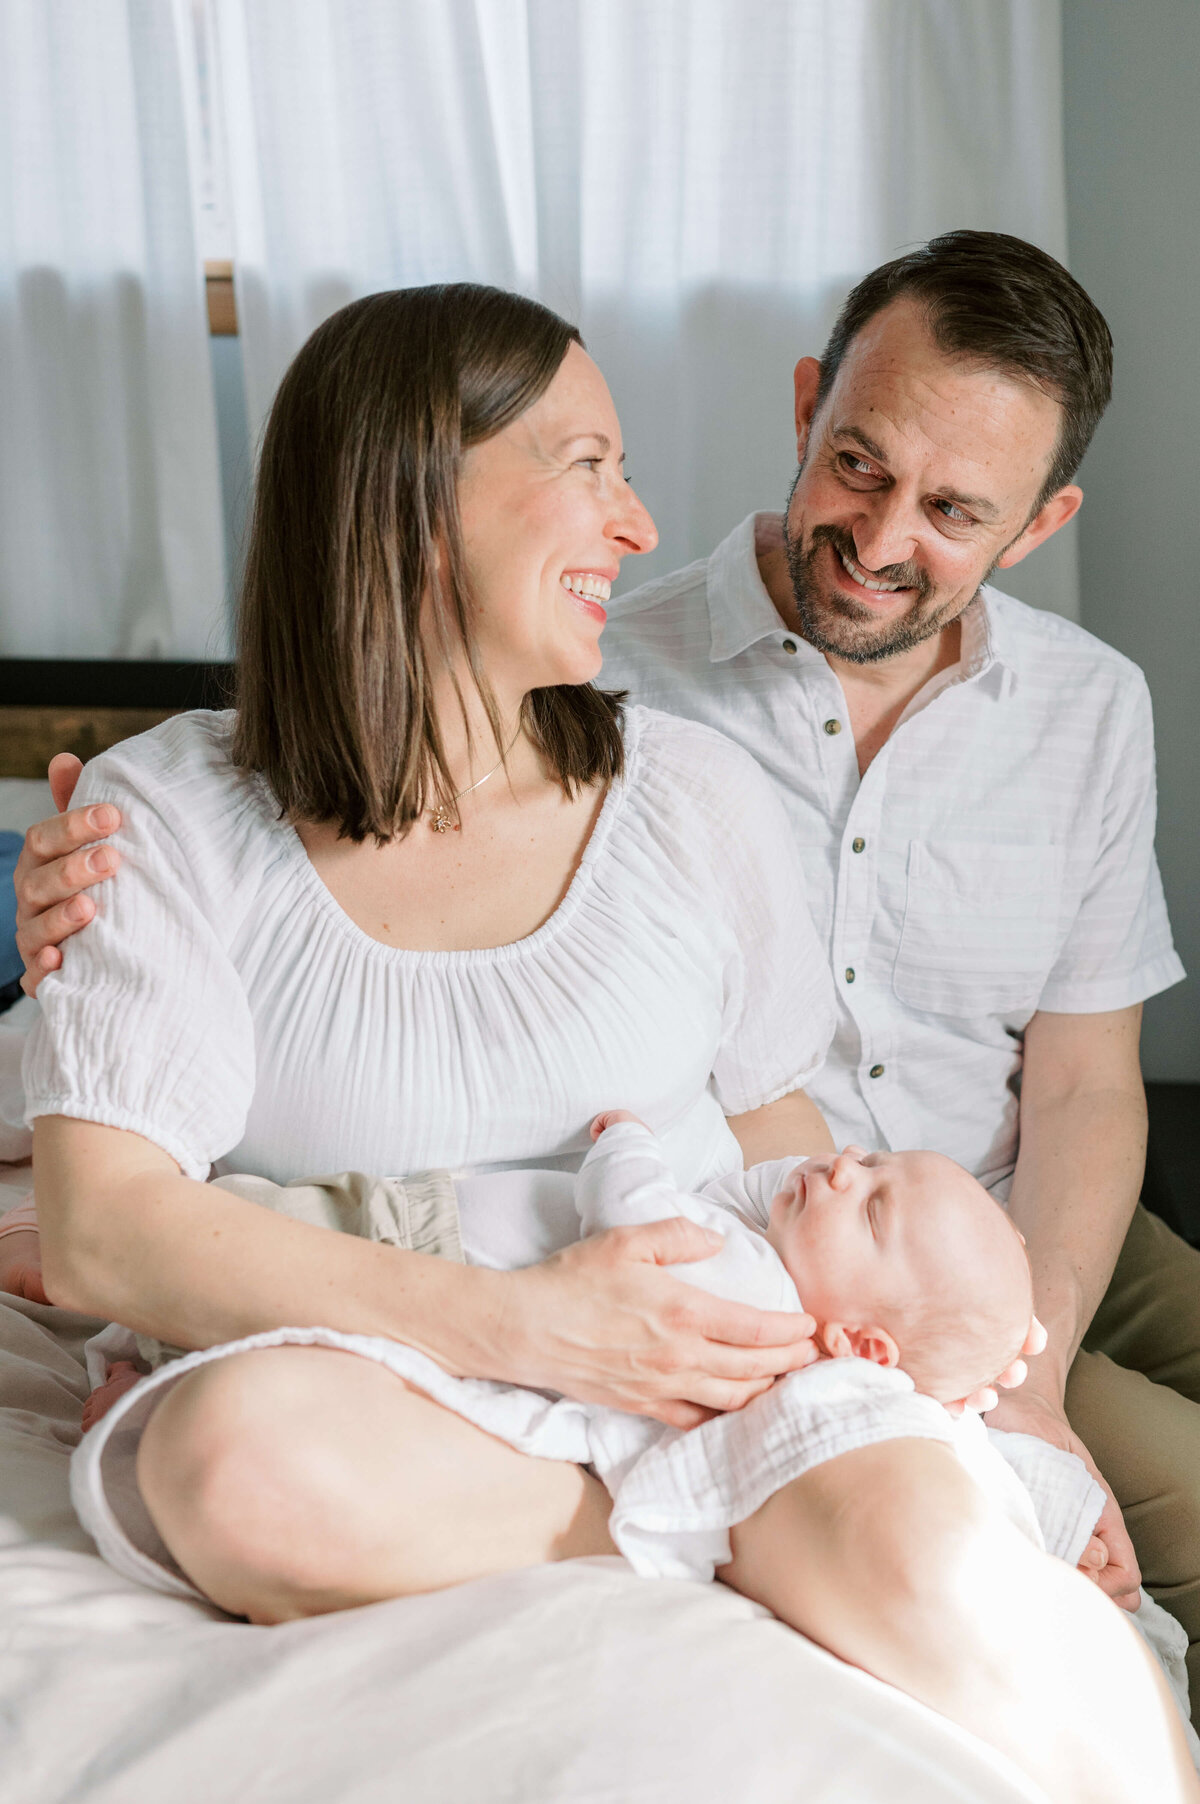 A smiling woman is hugged by her husband as she holds their new son in her lap in an image by Virginia family photographer